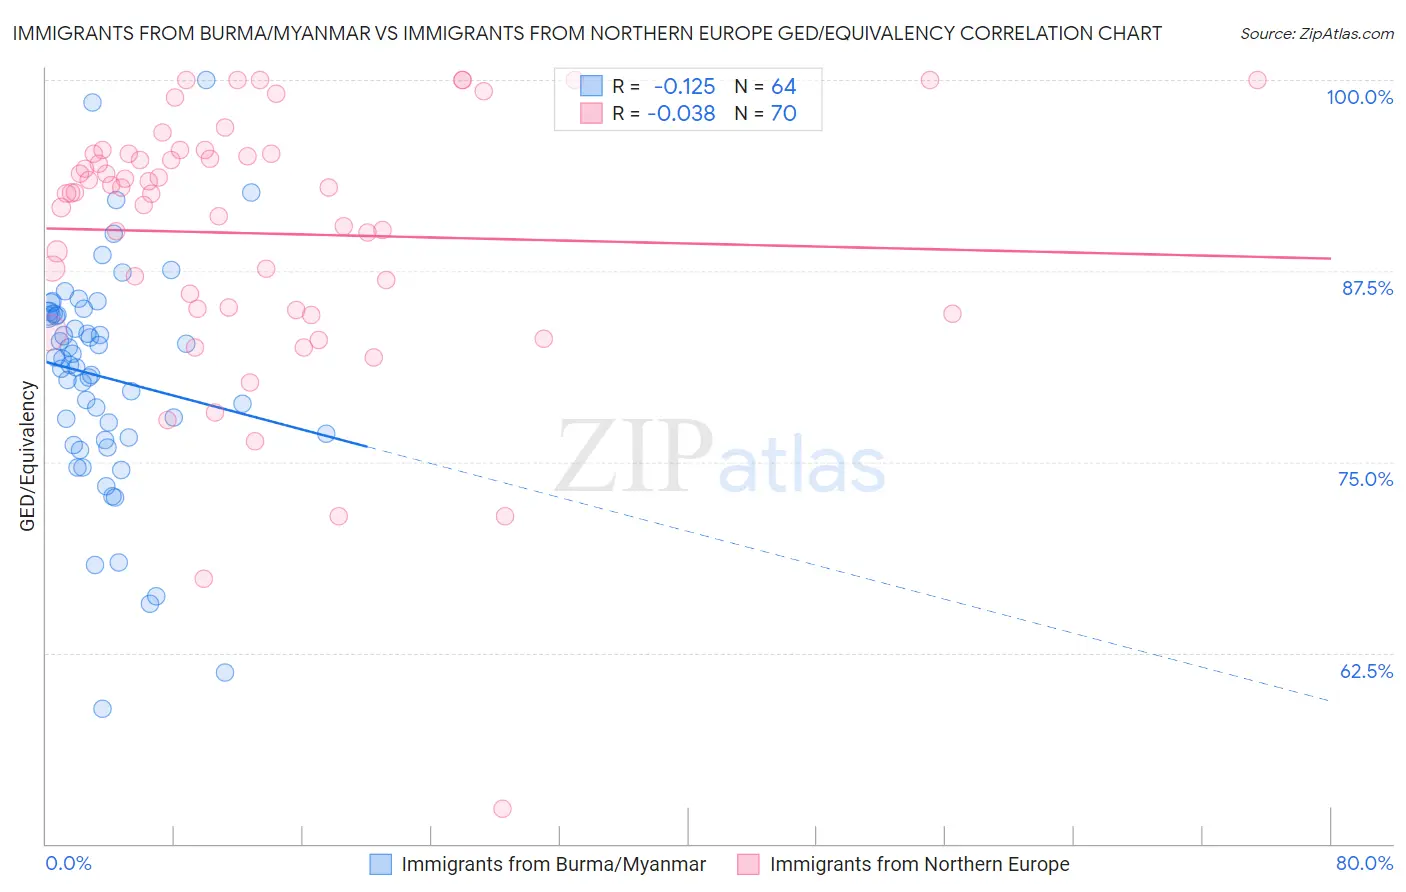 Immigrants from Burma/Myanmar vs Immigrants from Northern Europe GED/Equivalency